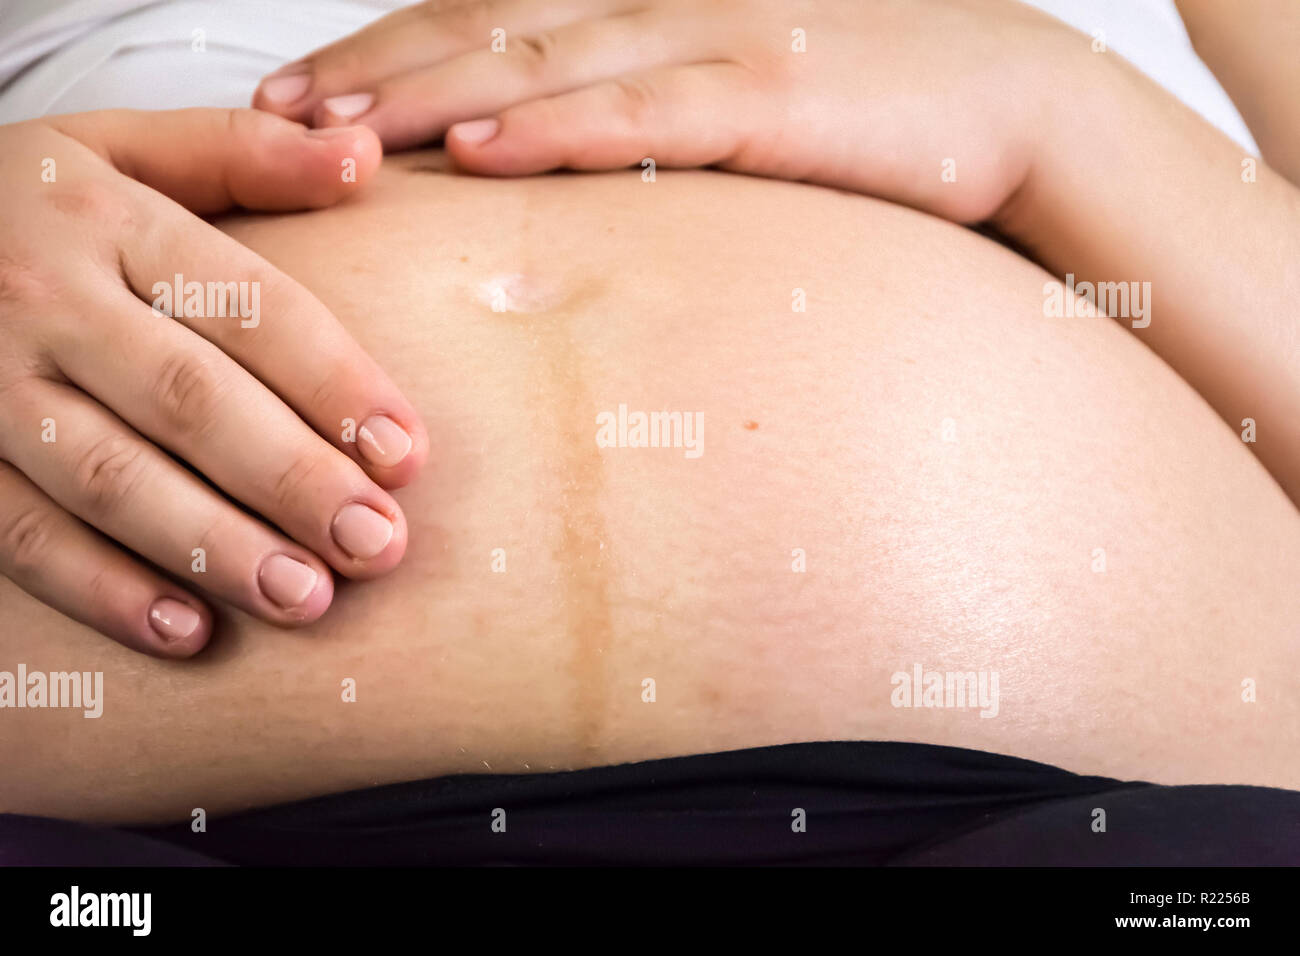 Hands of a pregnant woman caressing her belly. New life concept Stock Photo